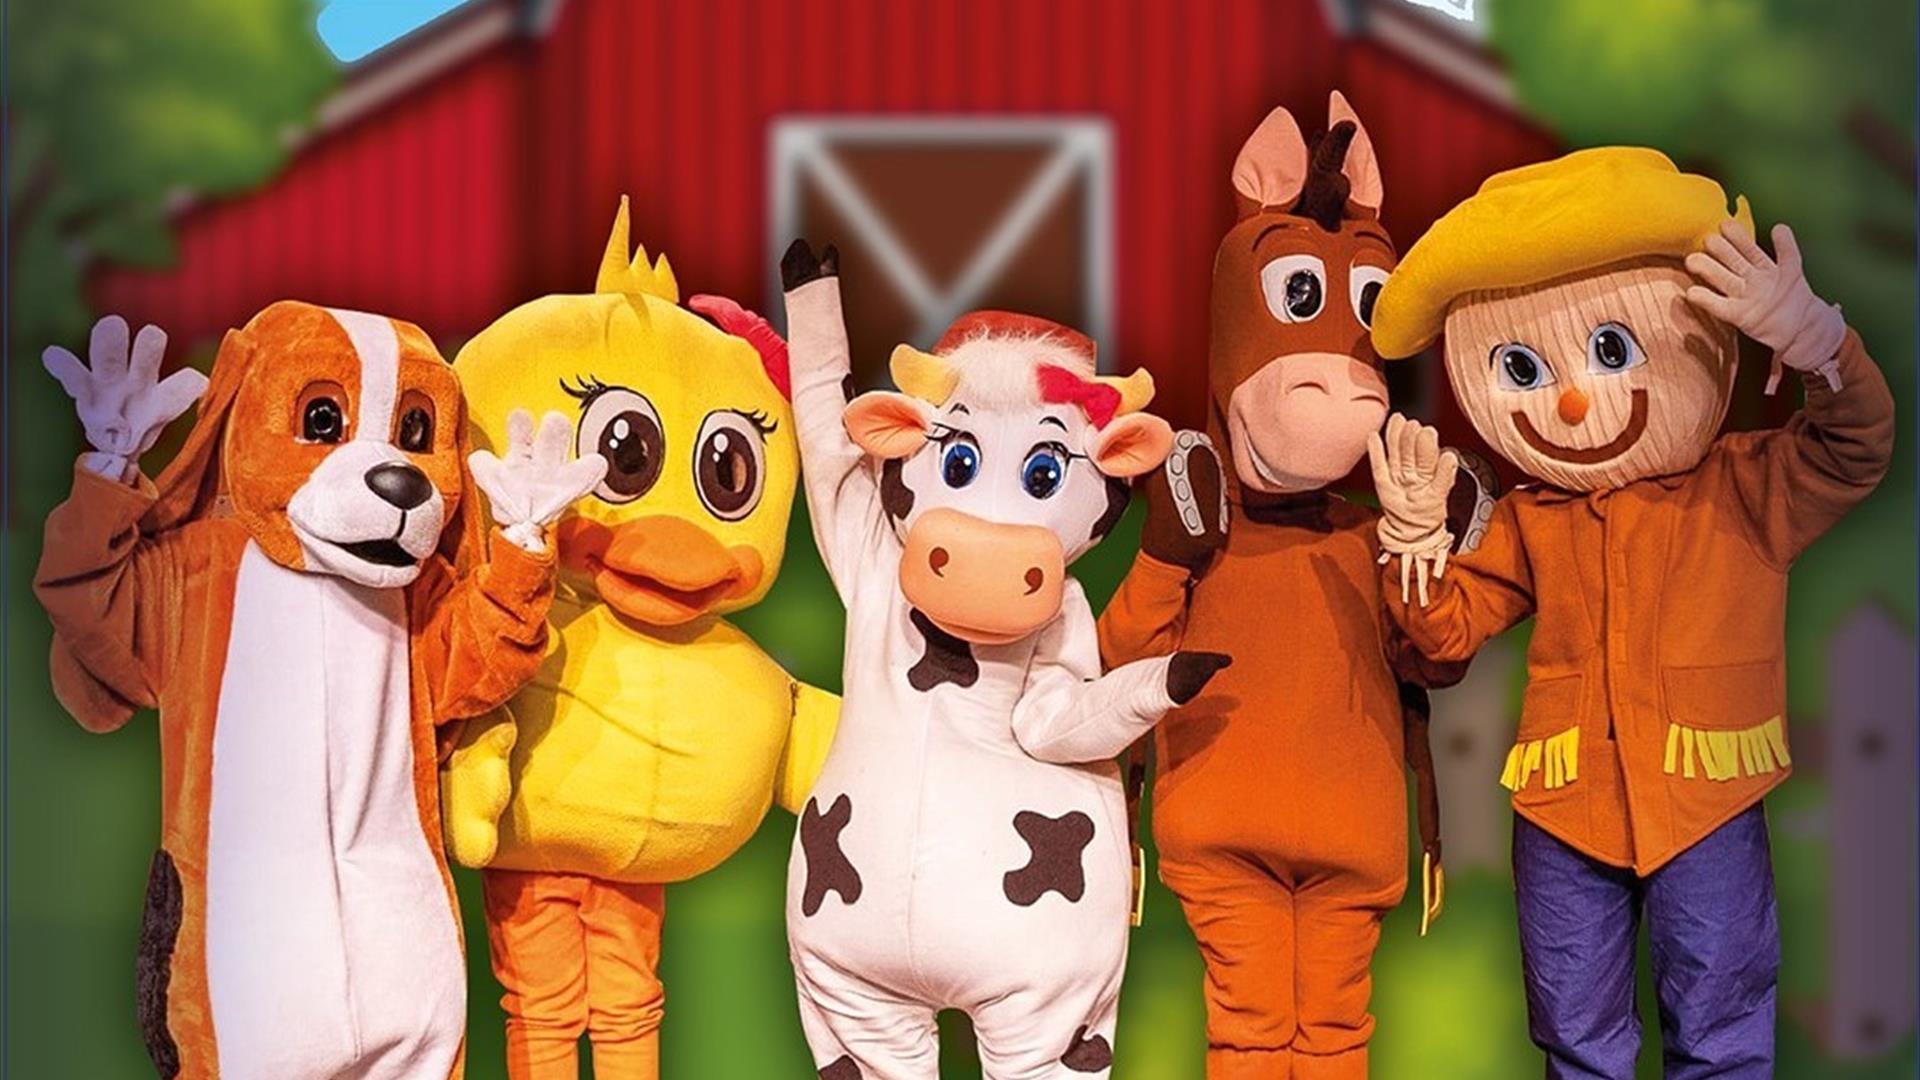 Life size farm characters in costume